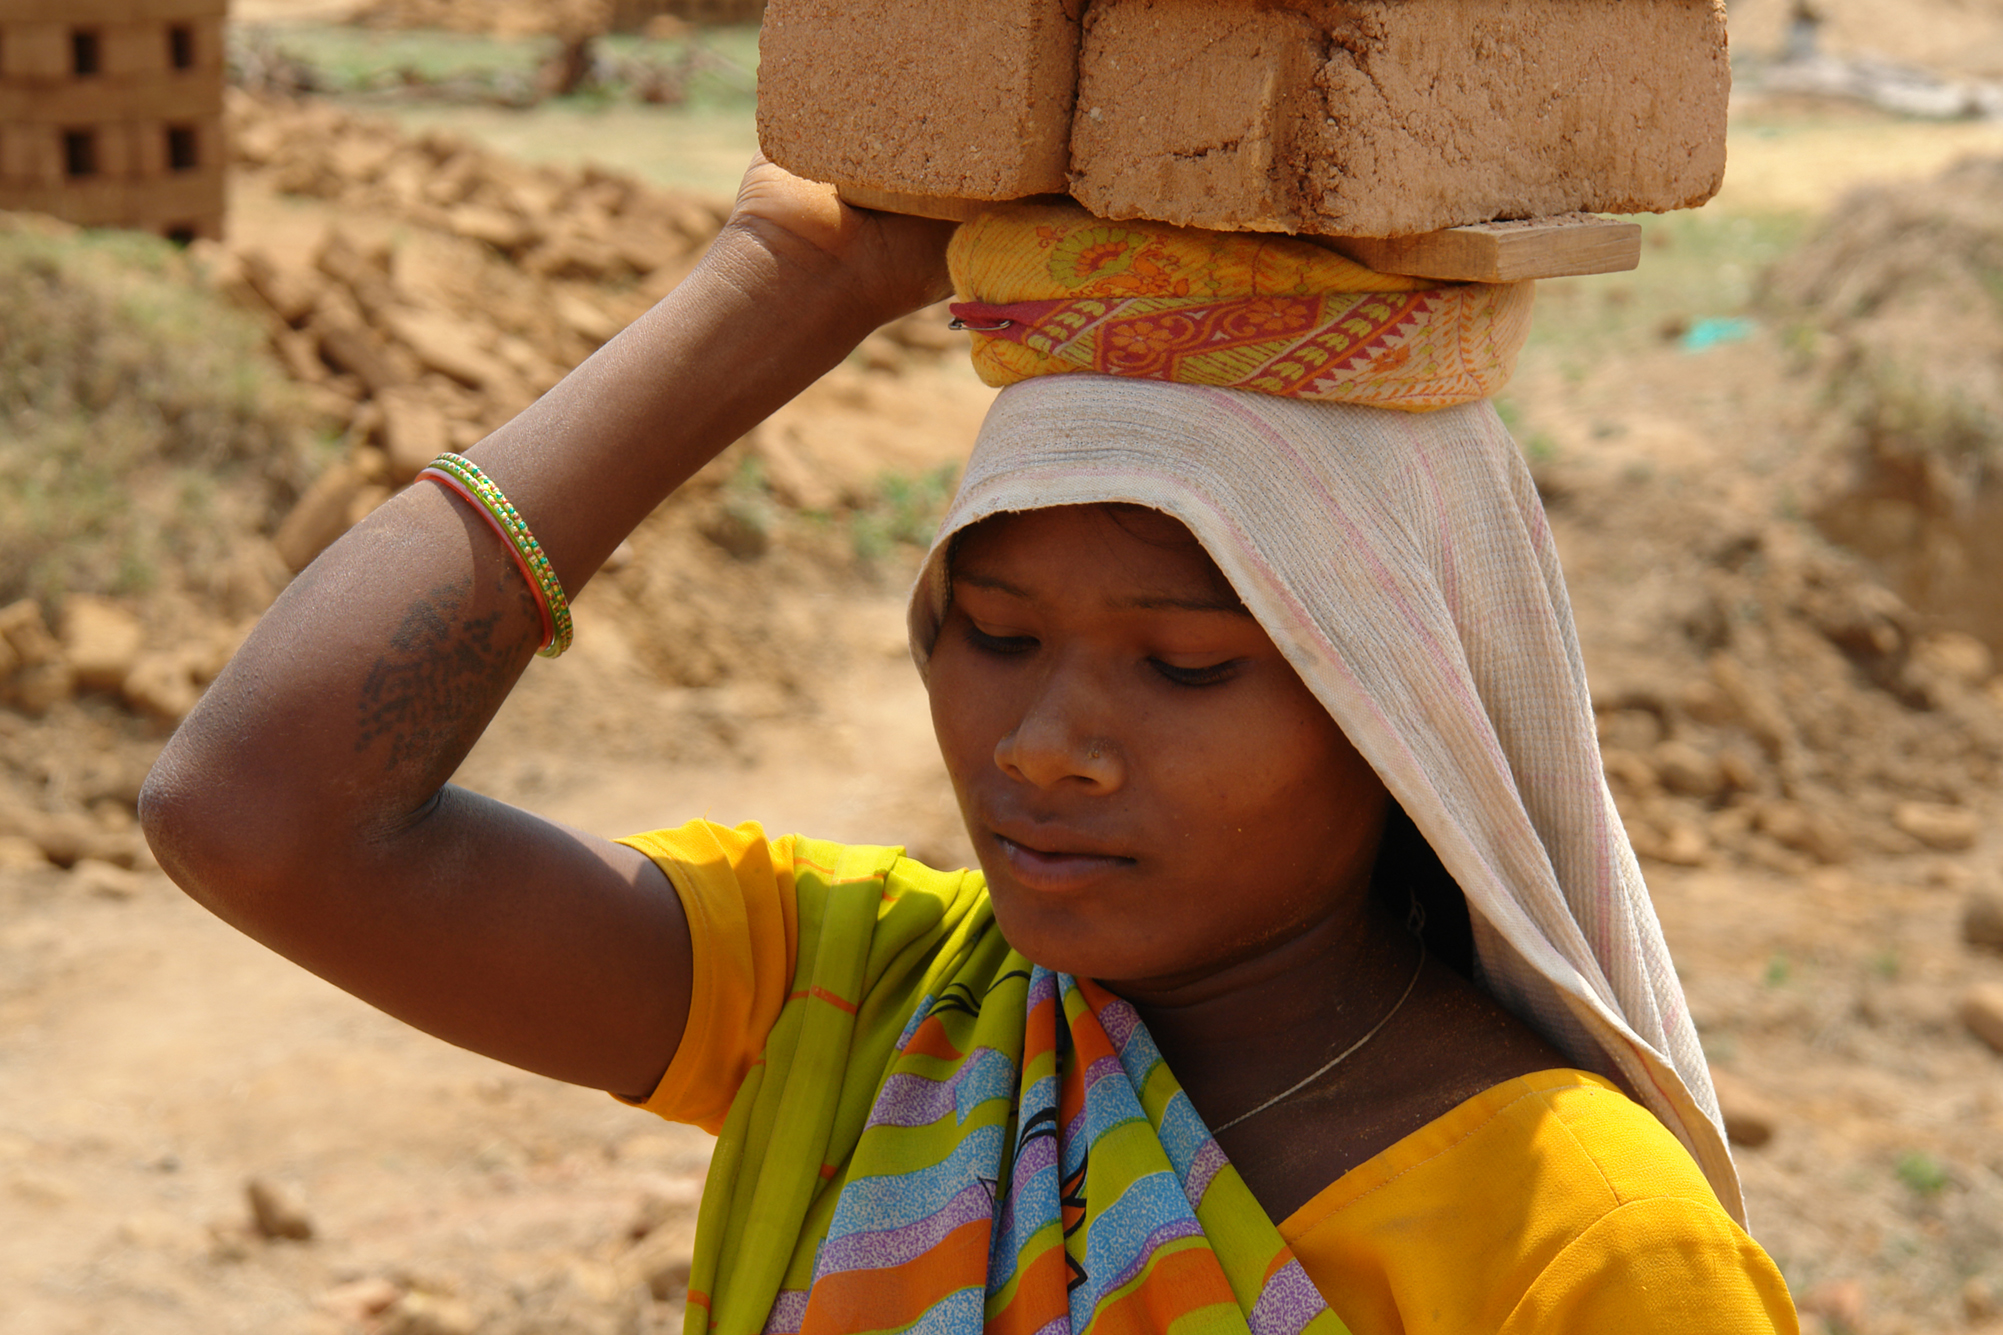 Young lady with yellow sari carrying woven basket on her head